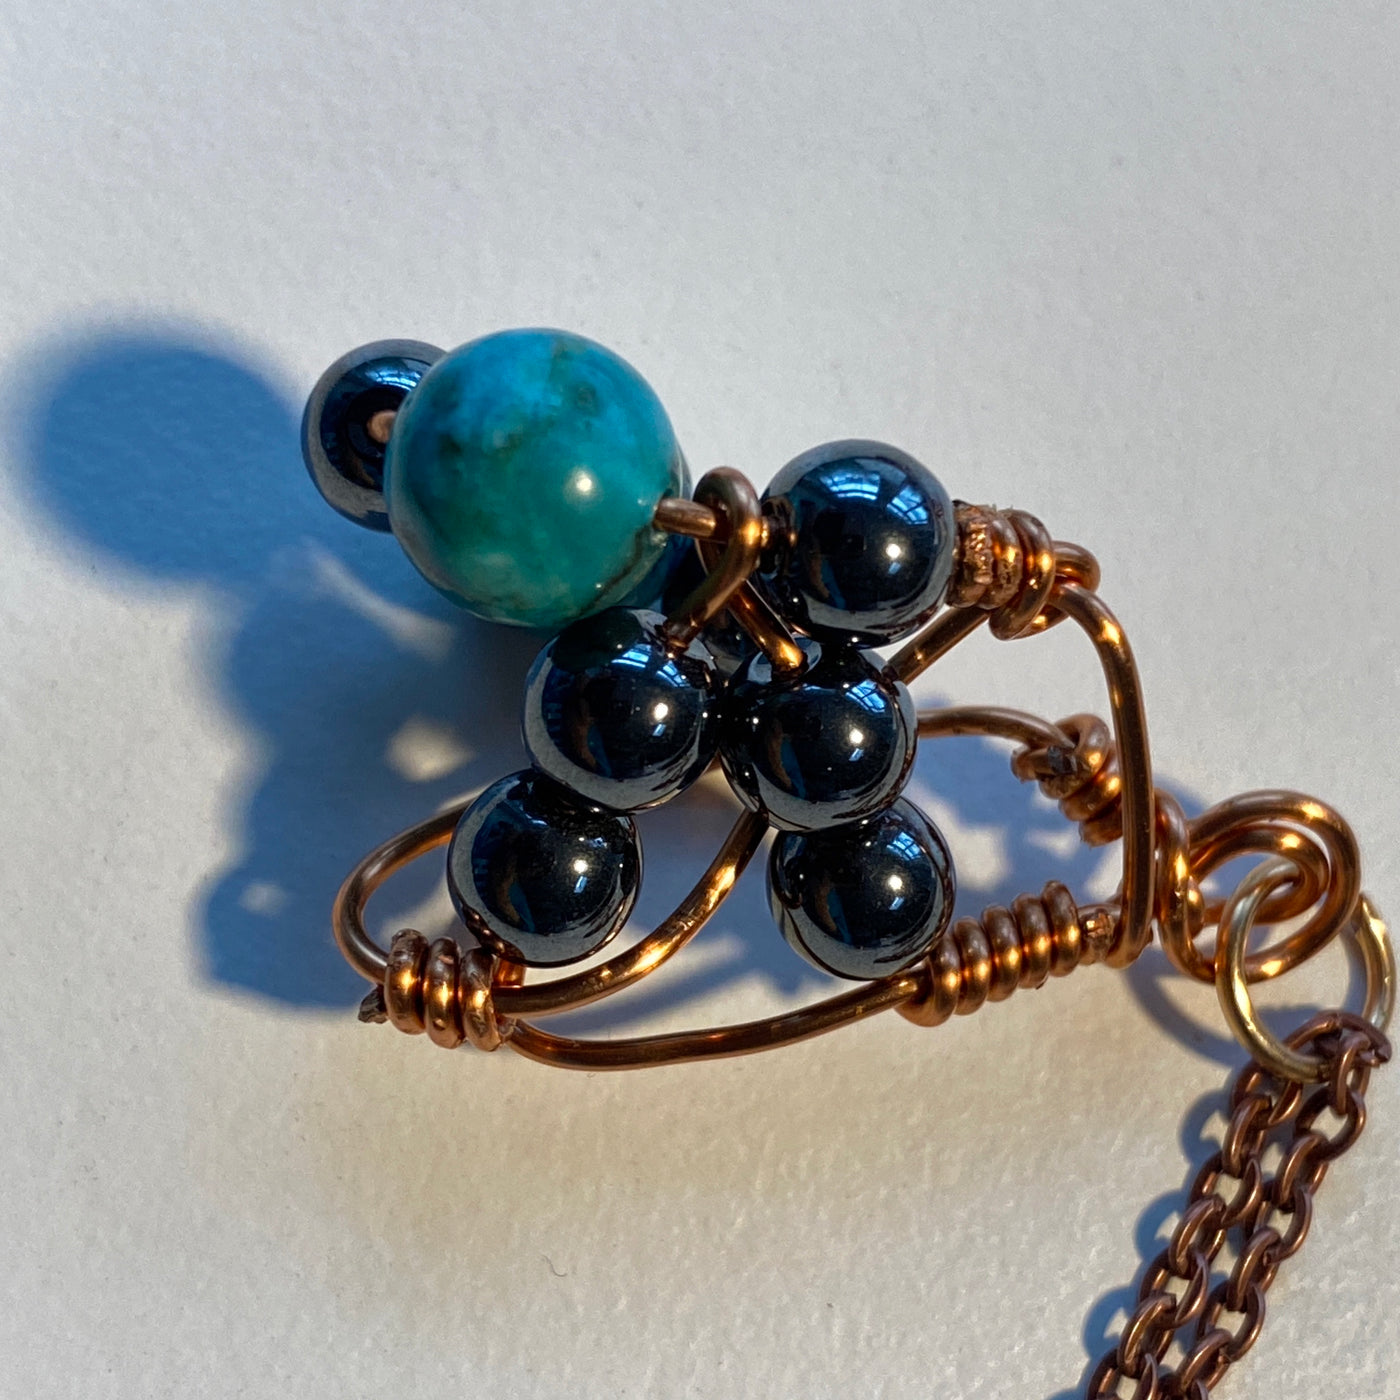 Hematite, turquoise and wire